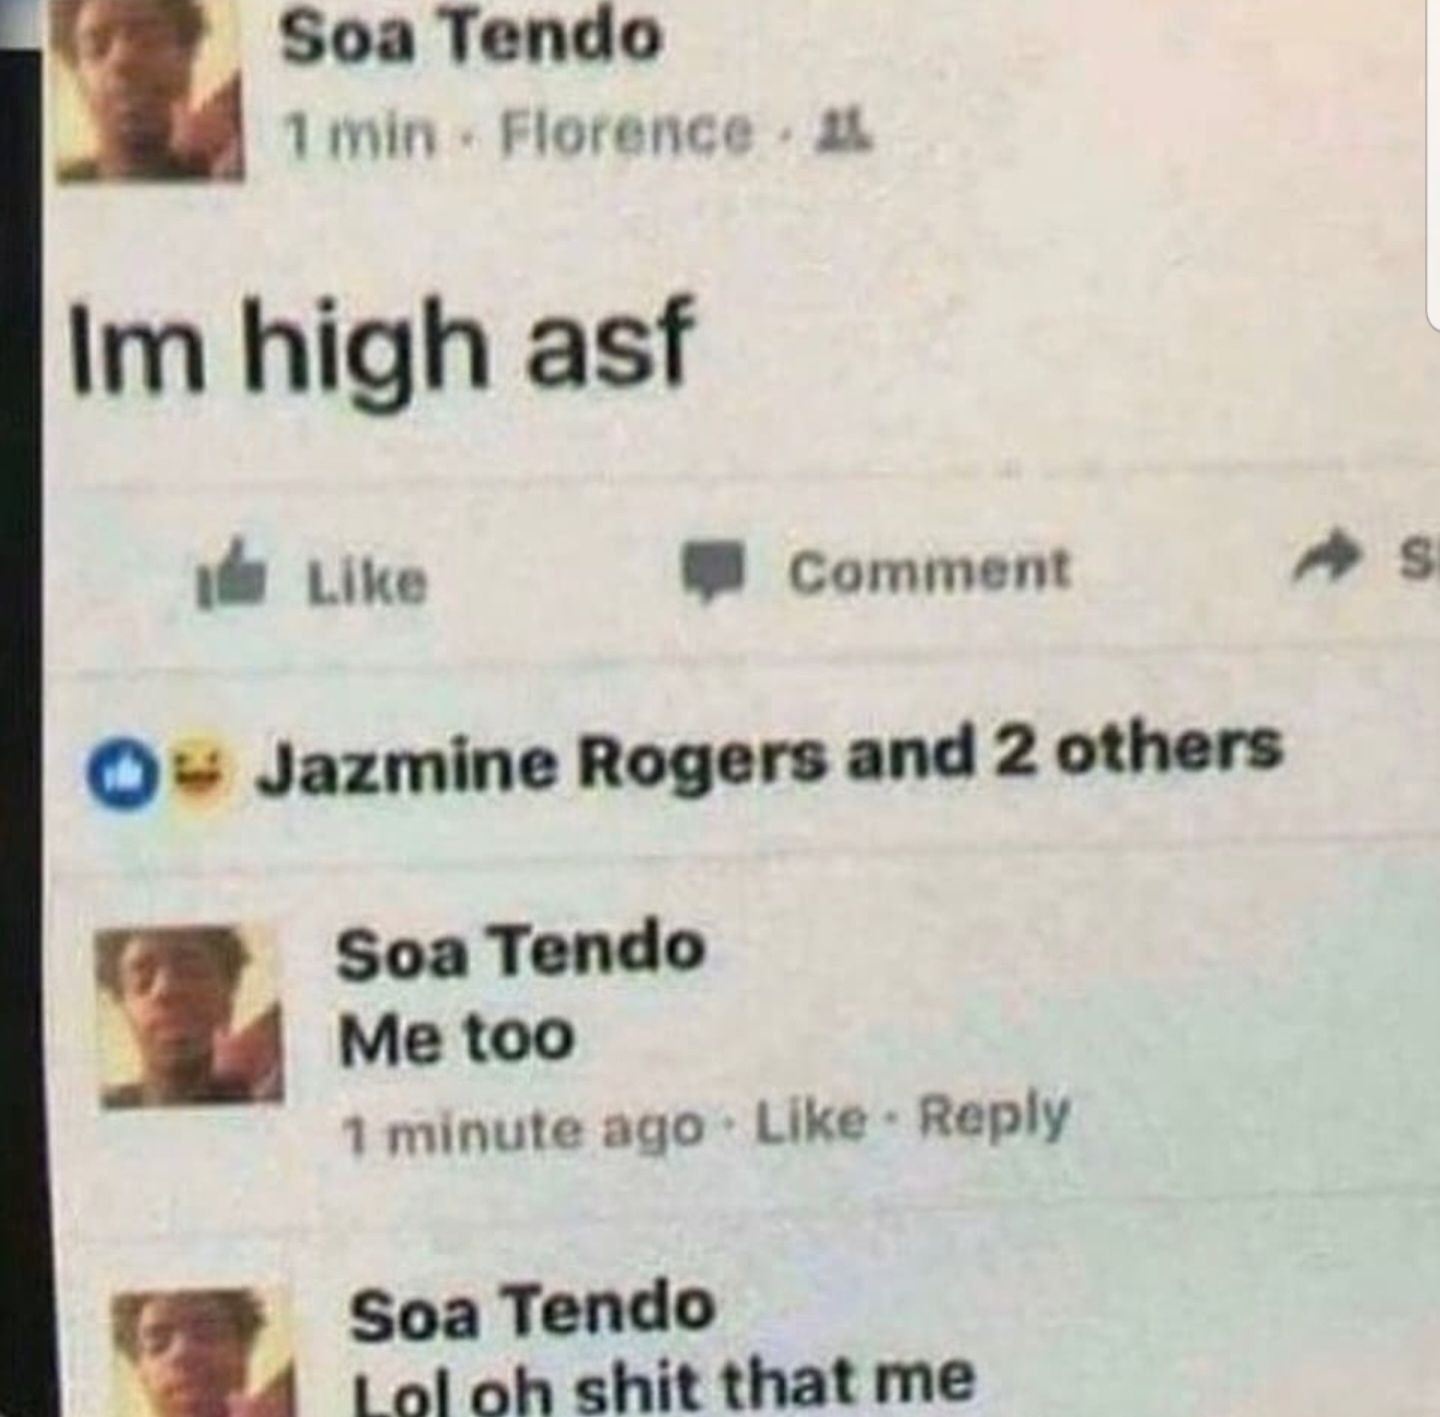 Soa Tendo
1 min Florence L
Im high asf
Like
Comment
-Jazmine Rogers and 2 others
Soa Tendo
Me too
1 minute ago Like - Reply
Soa Tendo
Lol oh shit that me
S